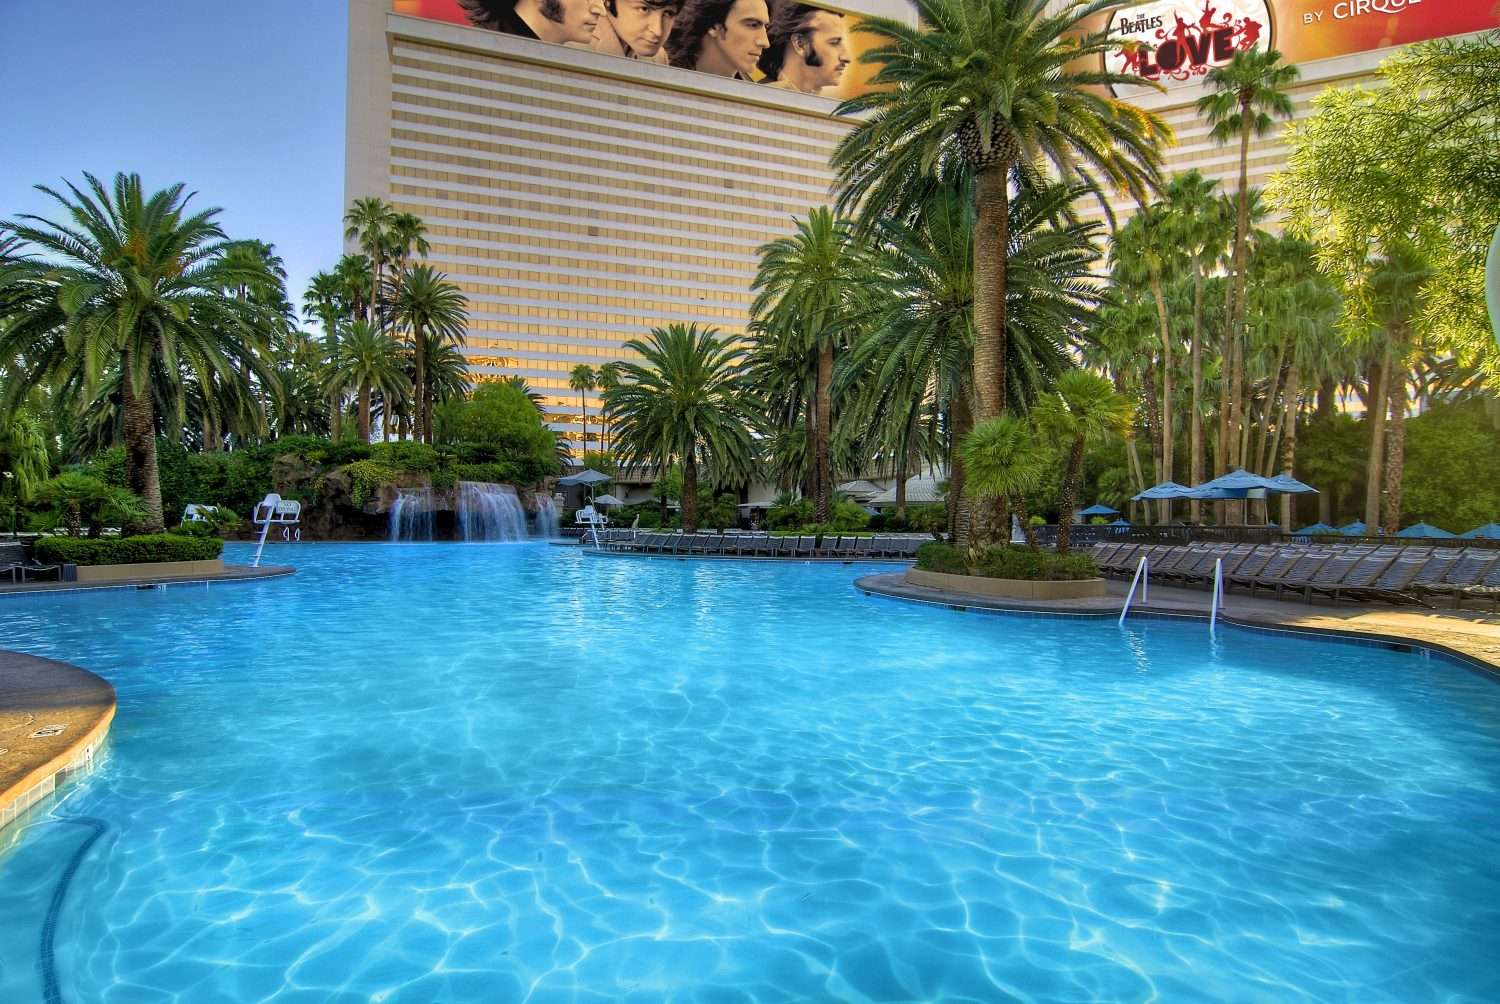 A Summer Guide to the Hottest Vegas Pools